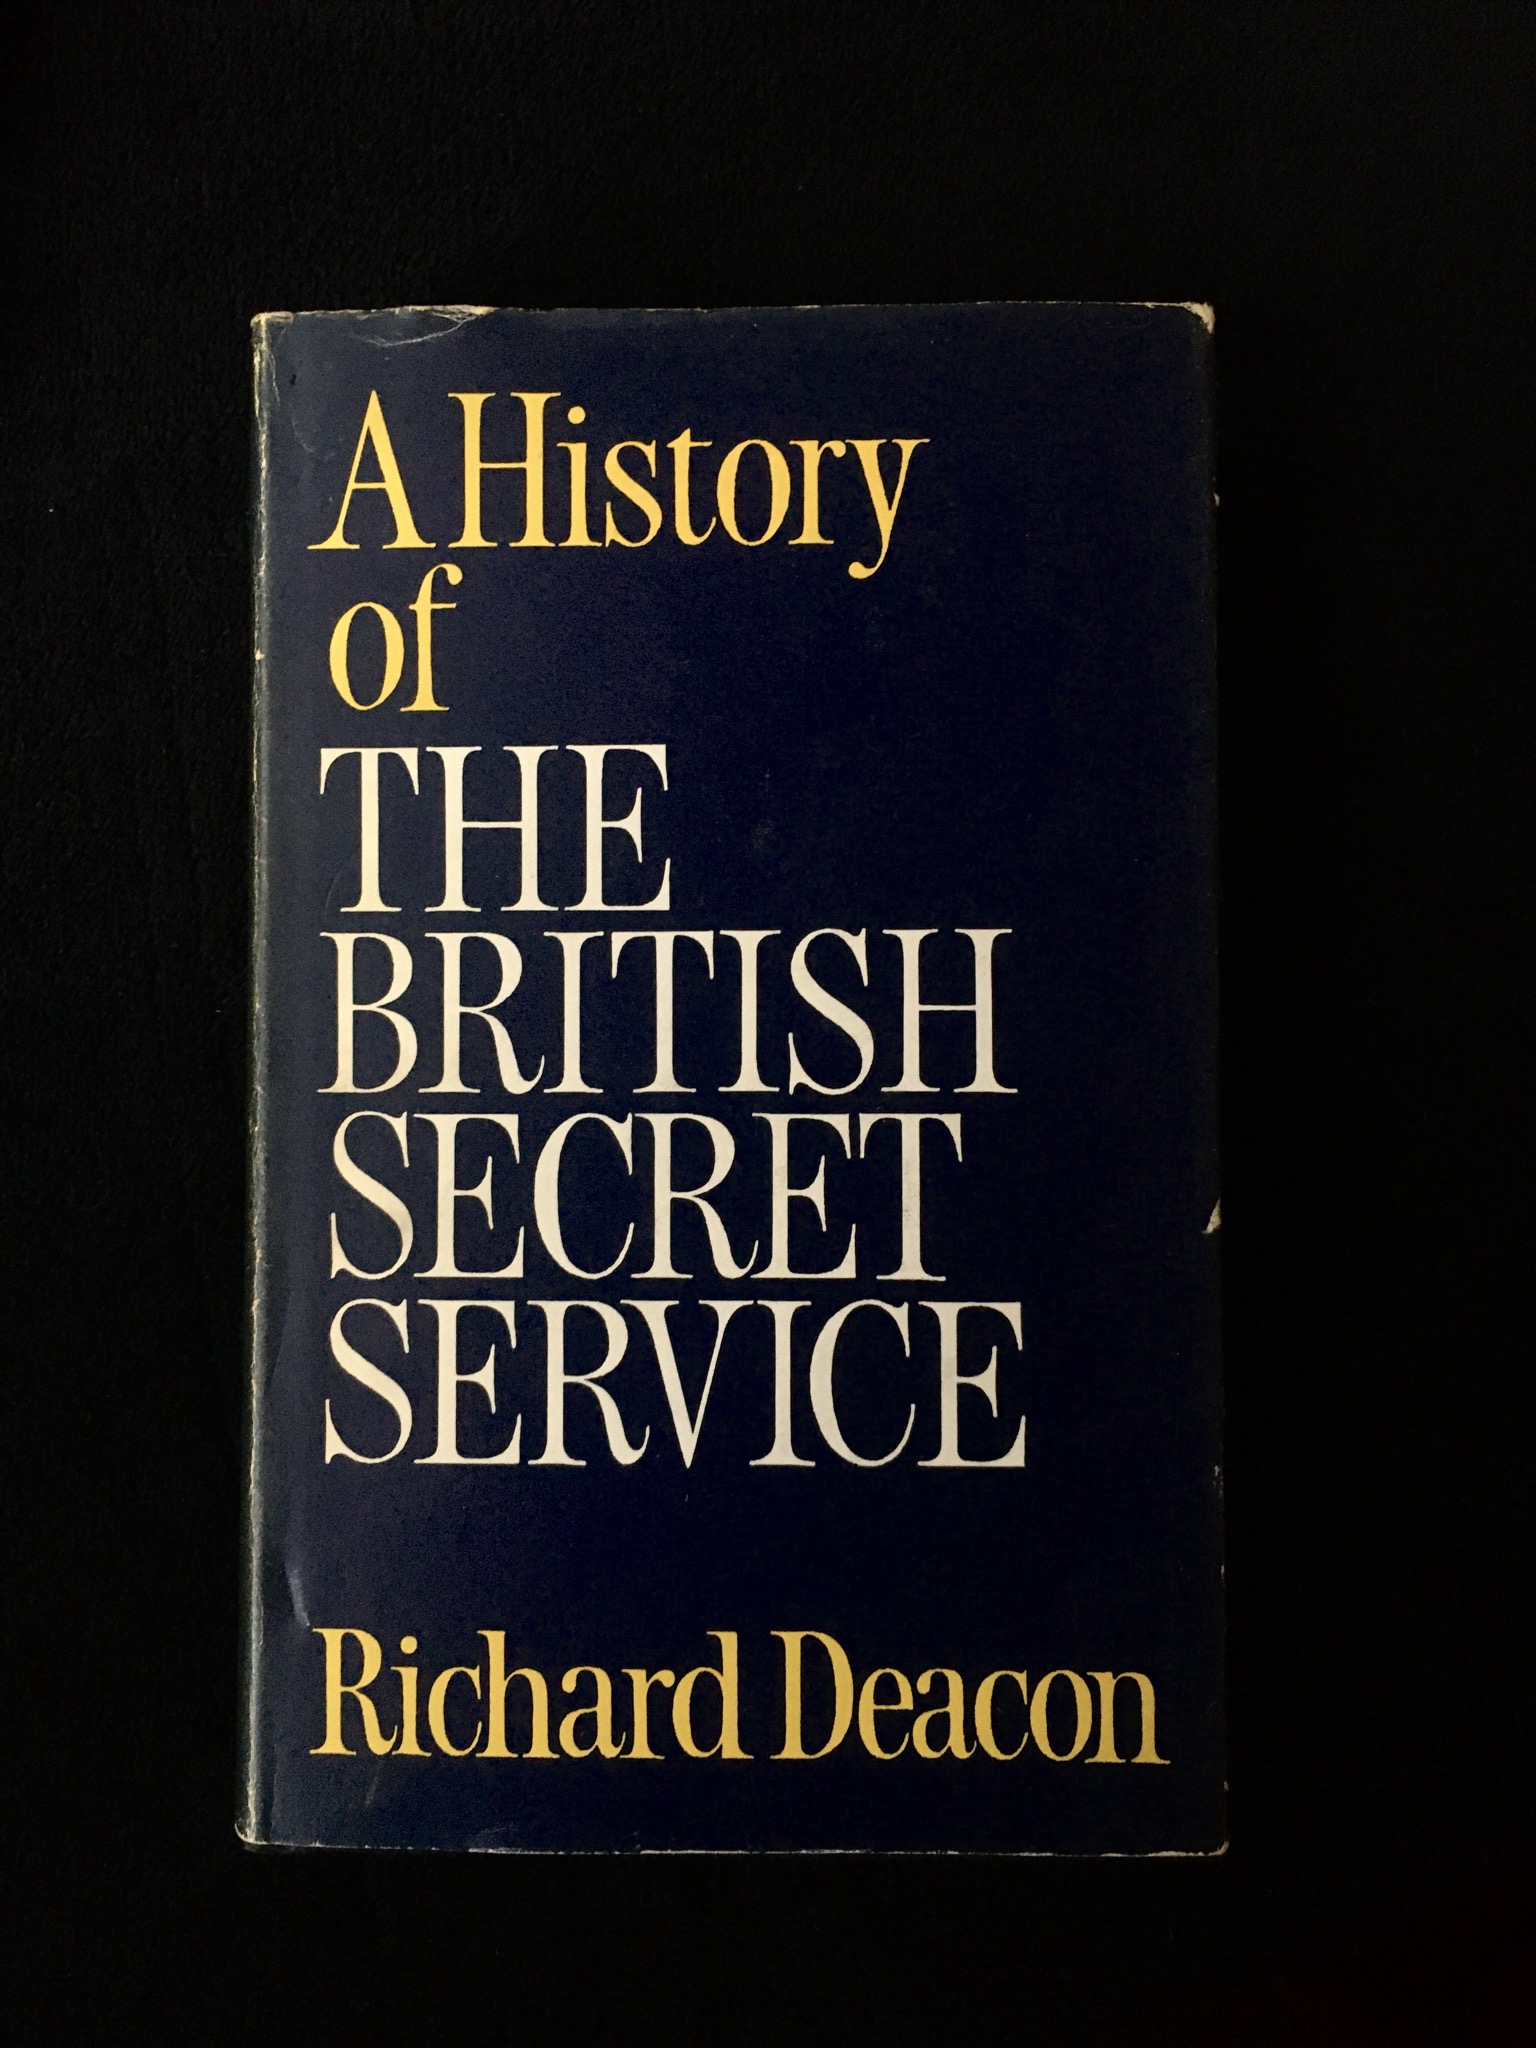 A History of The British Secret Service by Richard Deacon